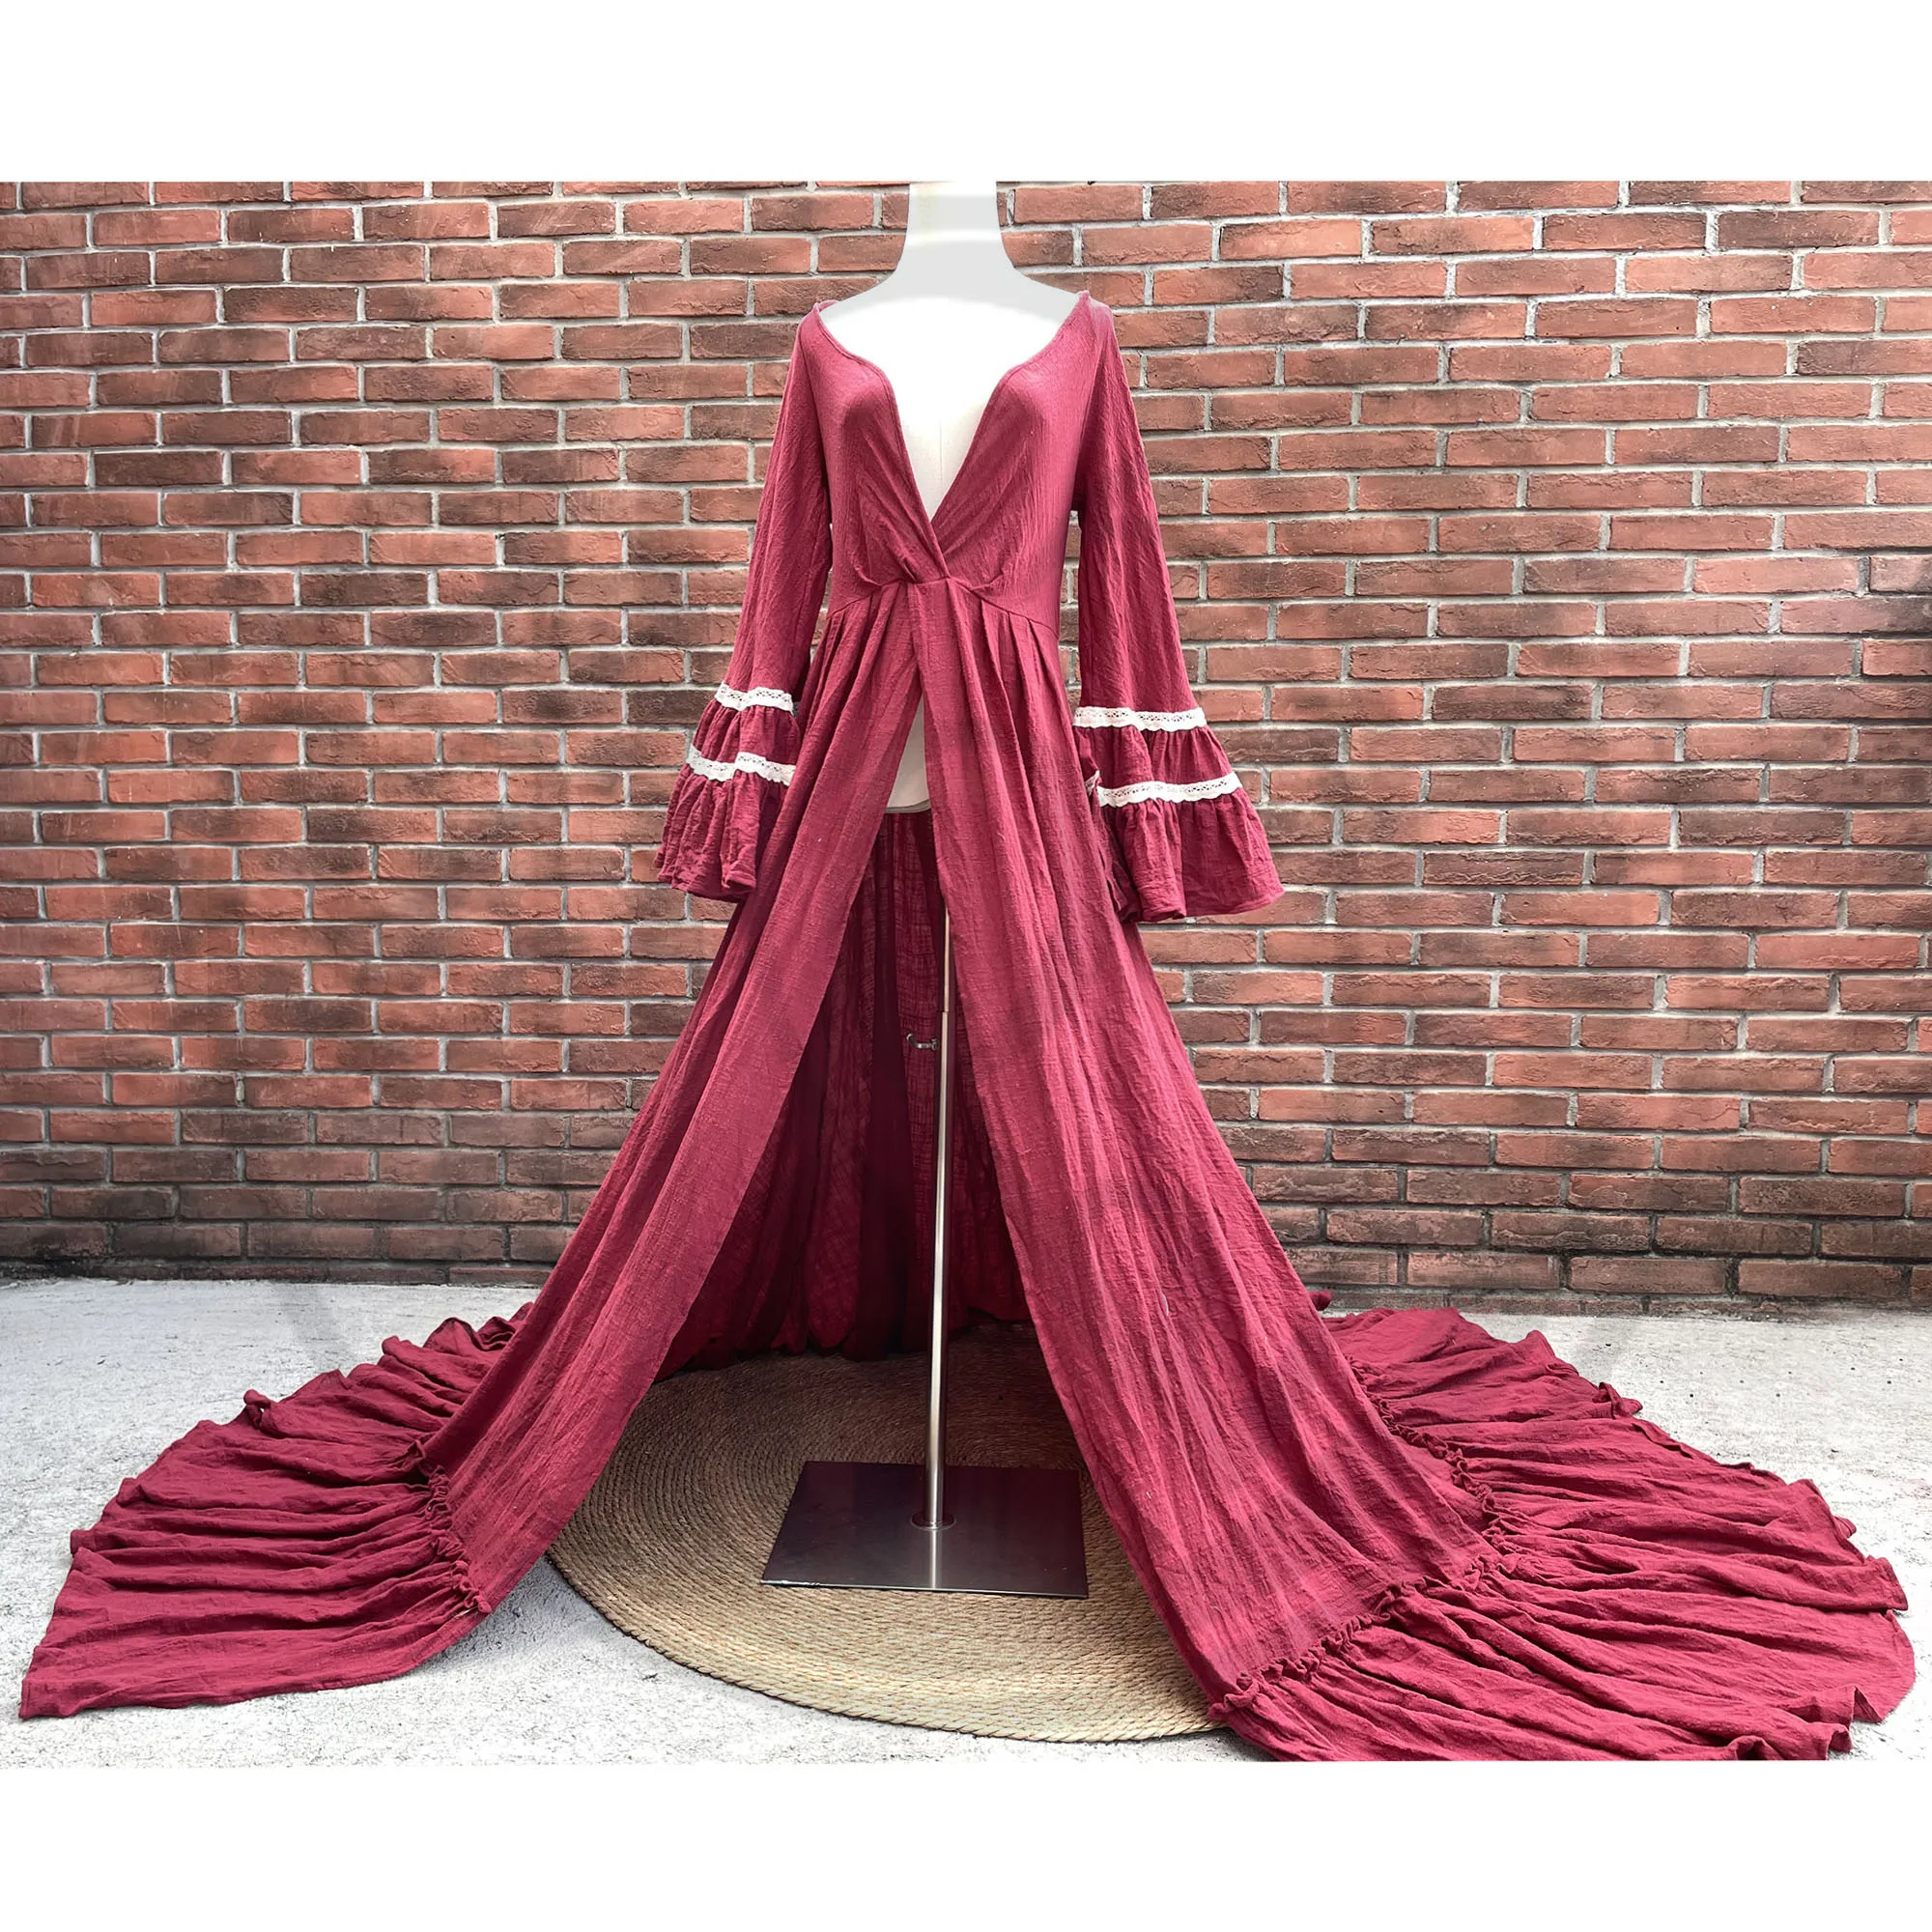 Photo Shoot Prop Cotton Deep V Full Ruffle Sleeves Robe Maternity Dress Evening Party Costume for Women Photography Accessories enlarge